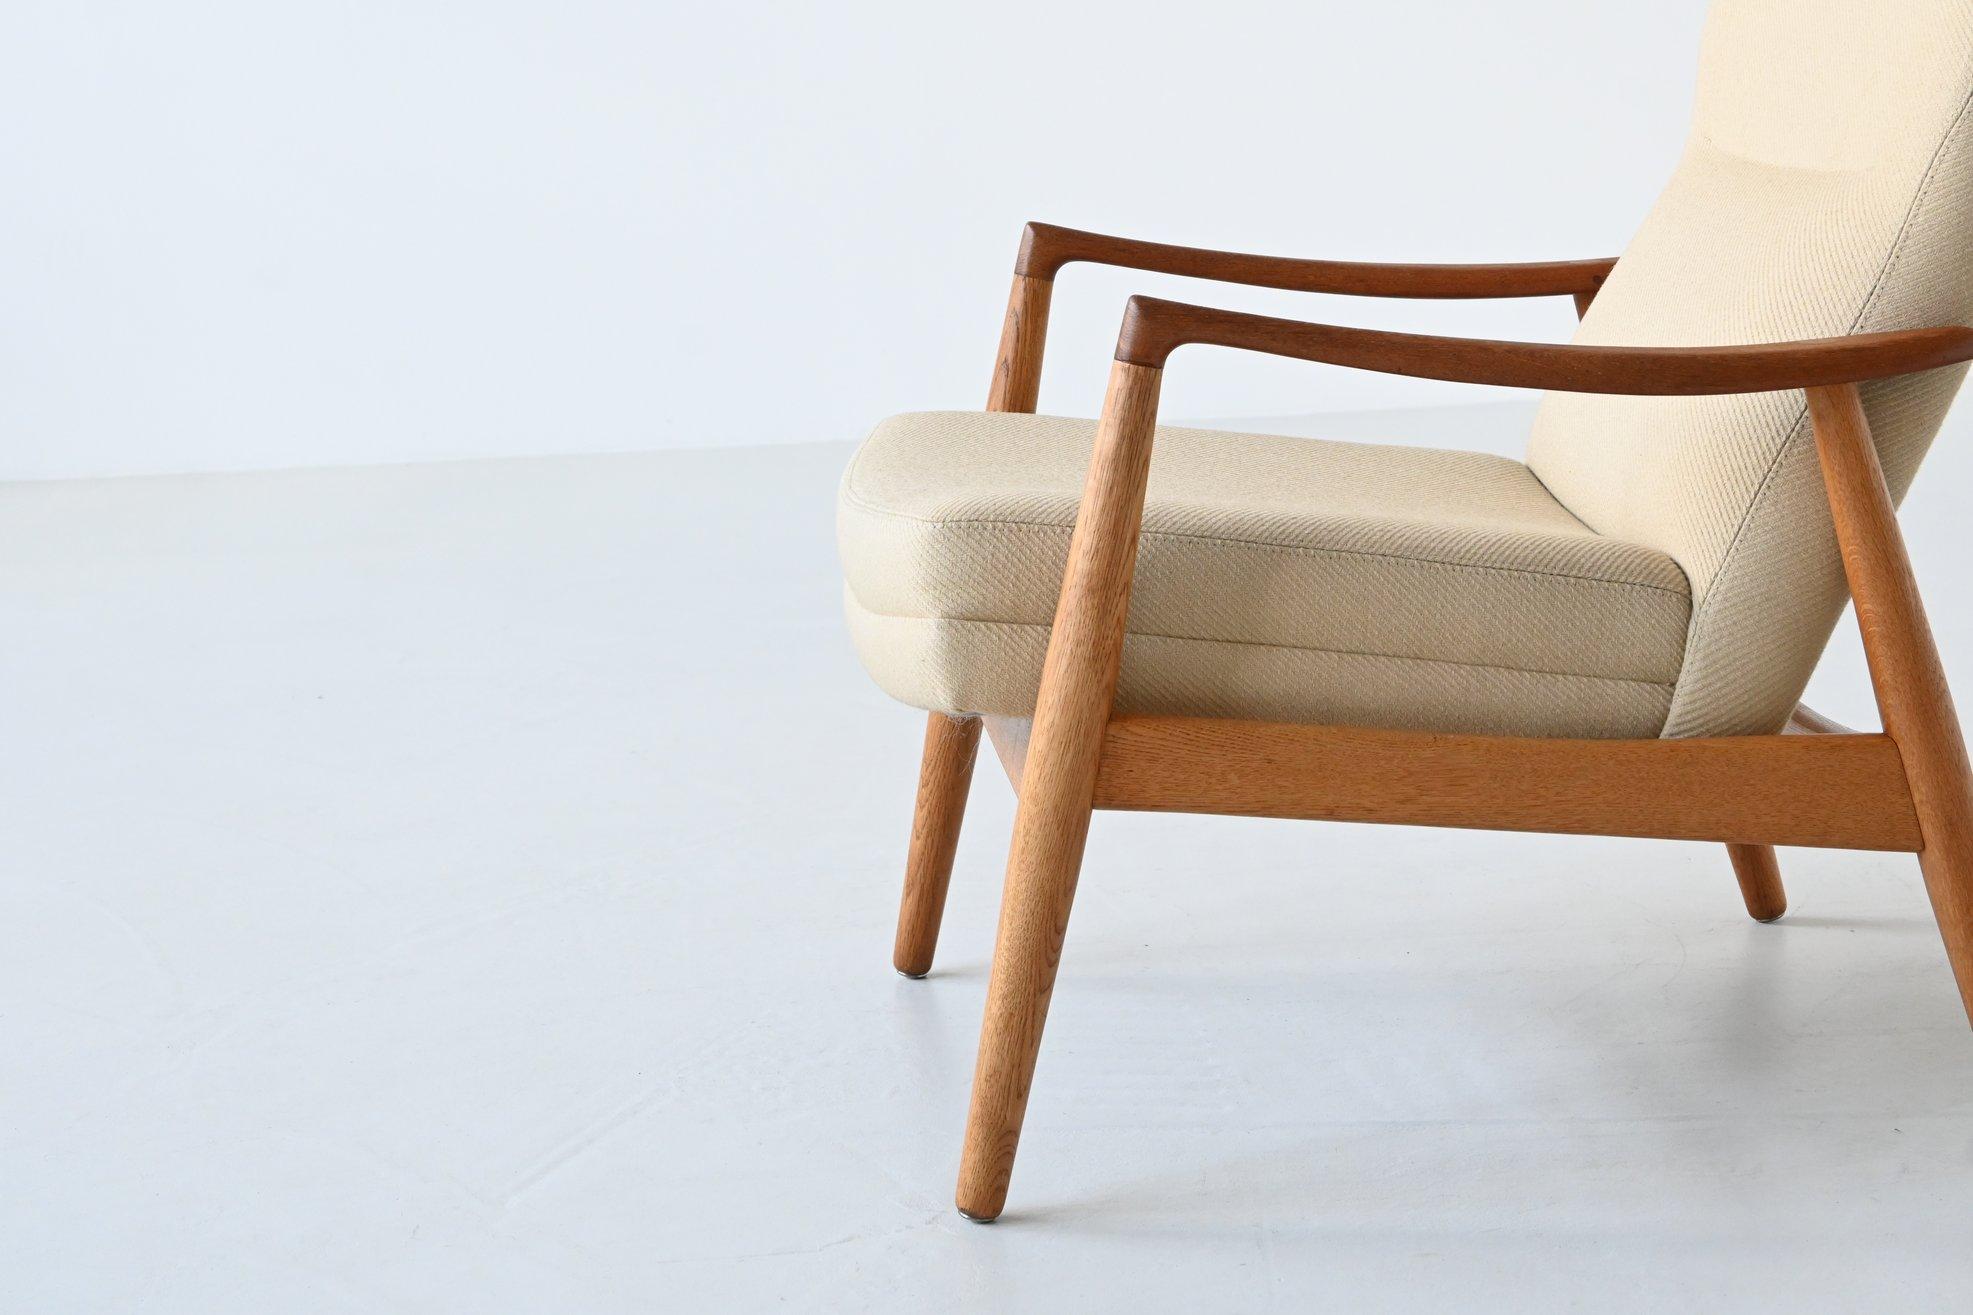 Fabric Madsen & Schubell Mette lounge chair Bovenkamp The Netherlands 1960 For Sale